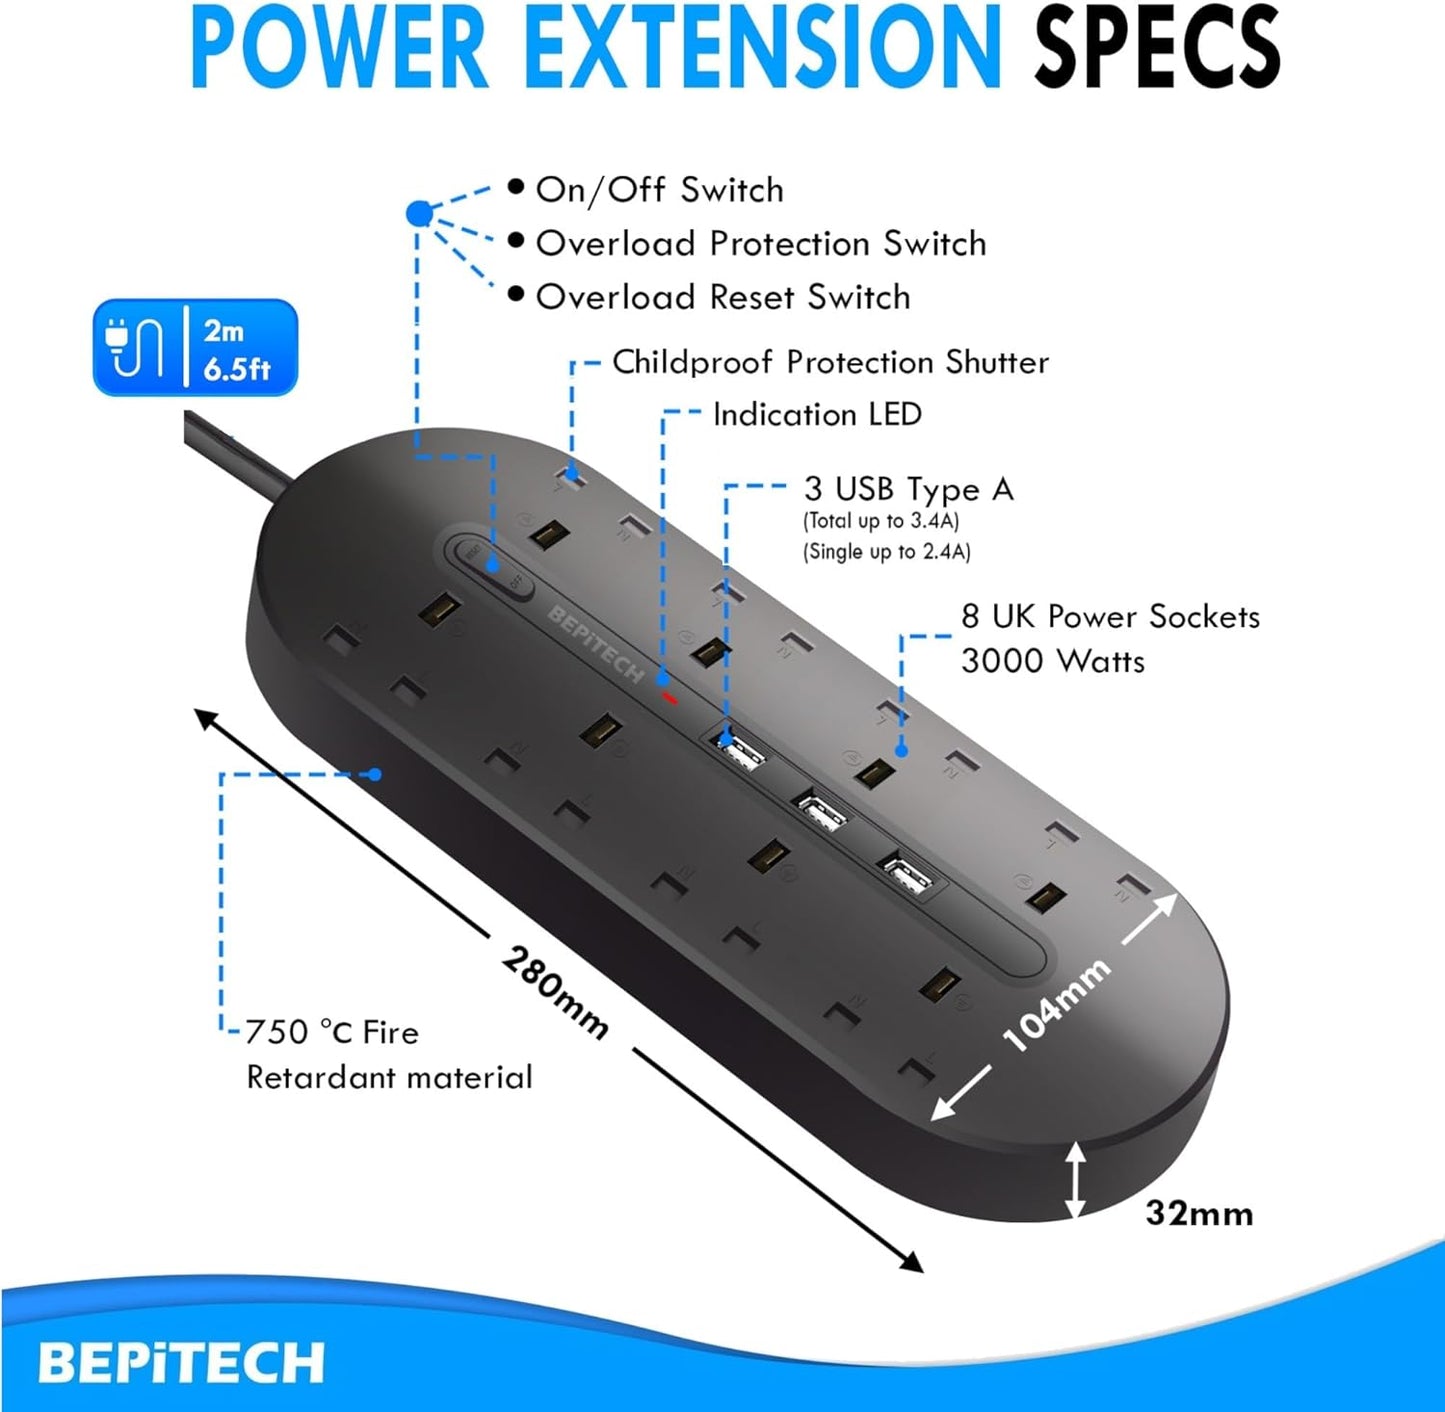 BEPiTECH 3-Meter Power Extension Cord Tower,12 Power Sockets 2500W suitable for big plugs with 4 Smart USB Slots Charging Station, Surge Protector Heavy Duty Power Strip for Office & Home Desktop